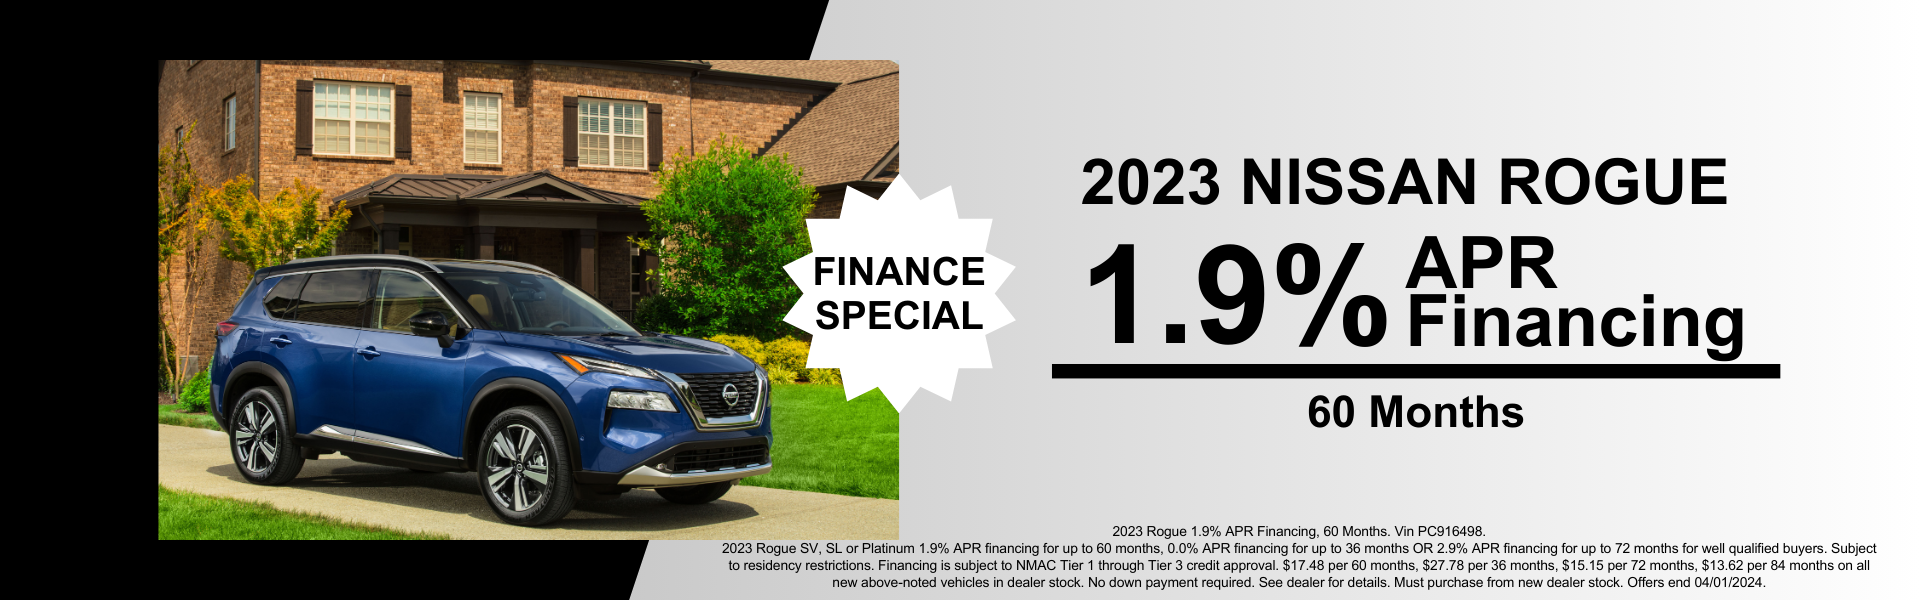 Nissan Rogue Finance Special